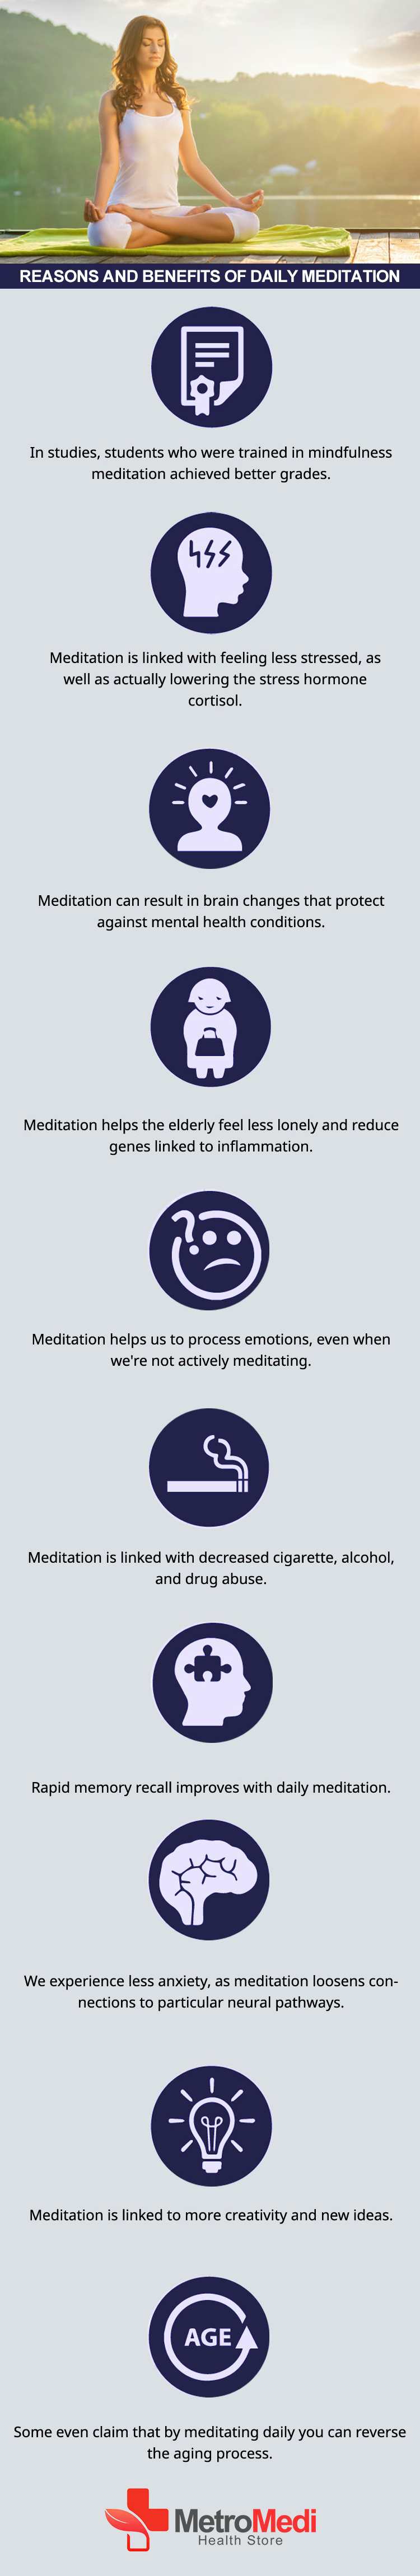 Daily-Meditation-Is-So-Beneficial